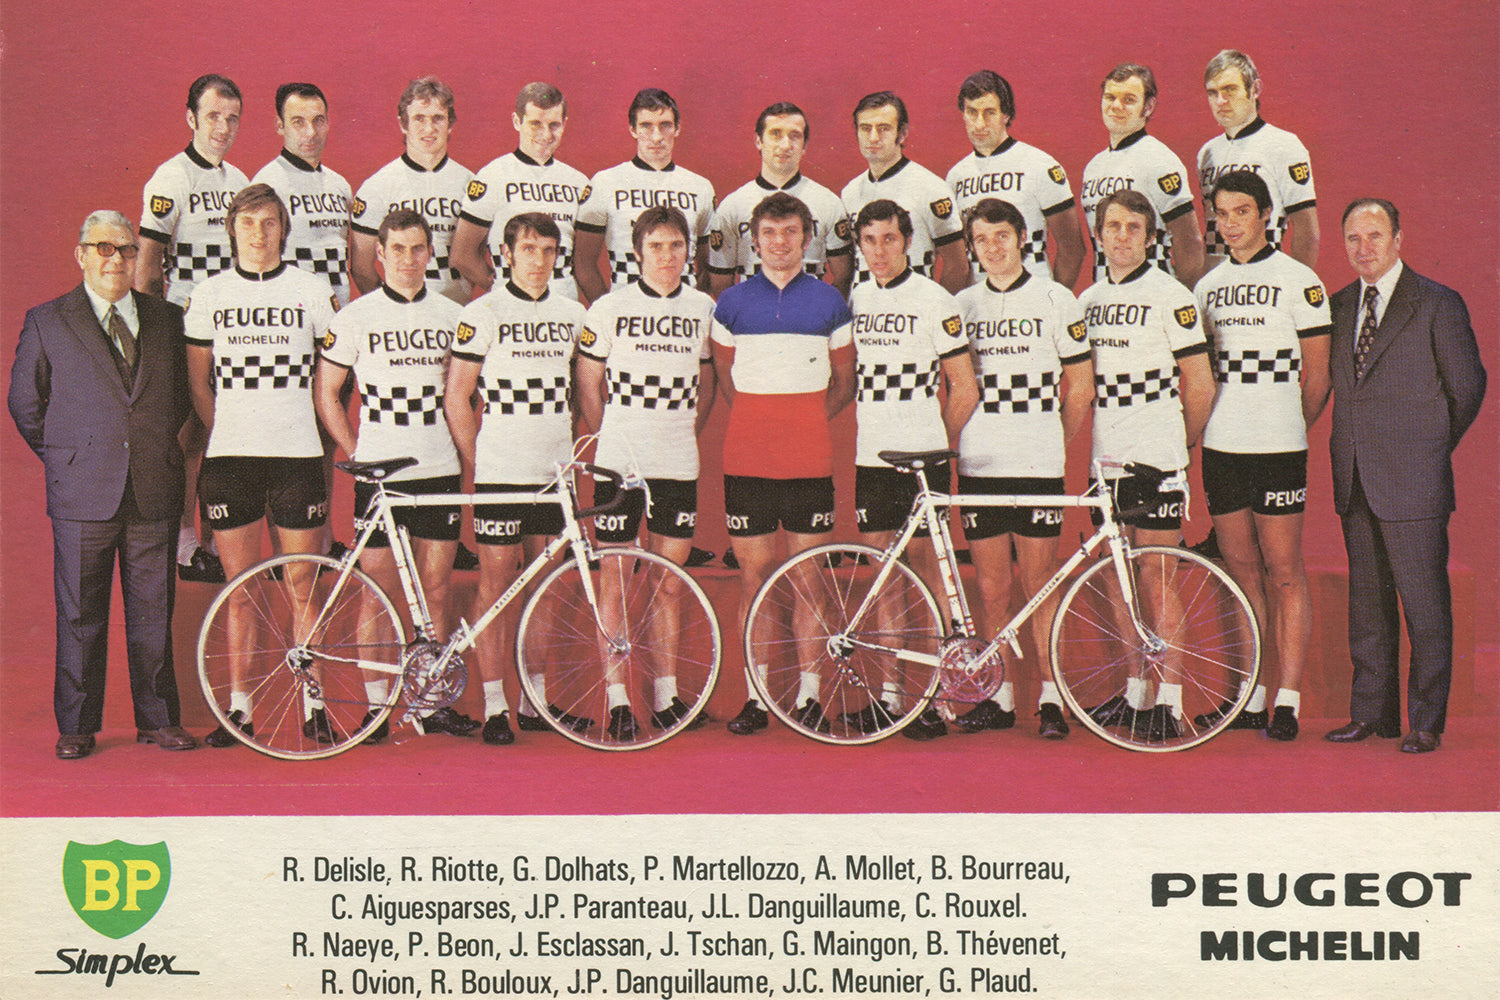 The Peugeot BP Micheling cycling team postcard from the 1974 season with French Champion Bernard Thevenet and teammates Patrick Beon, Bernard Bourreau, Jacques Esclassan et al.